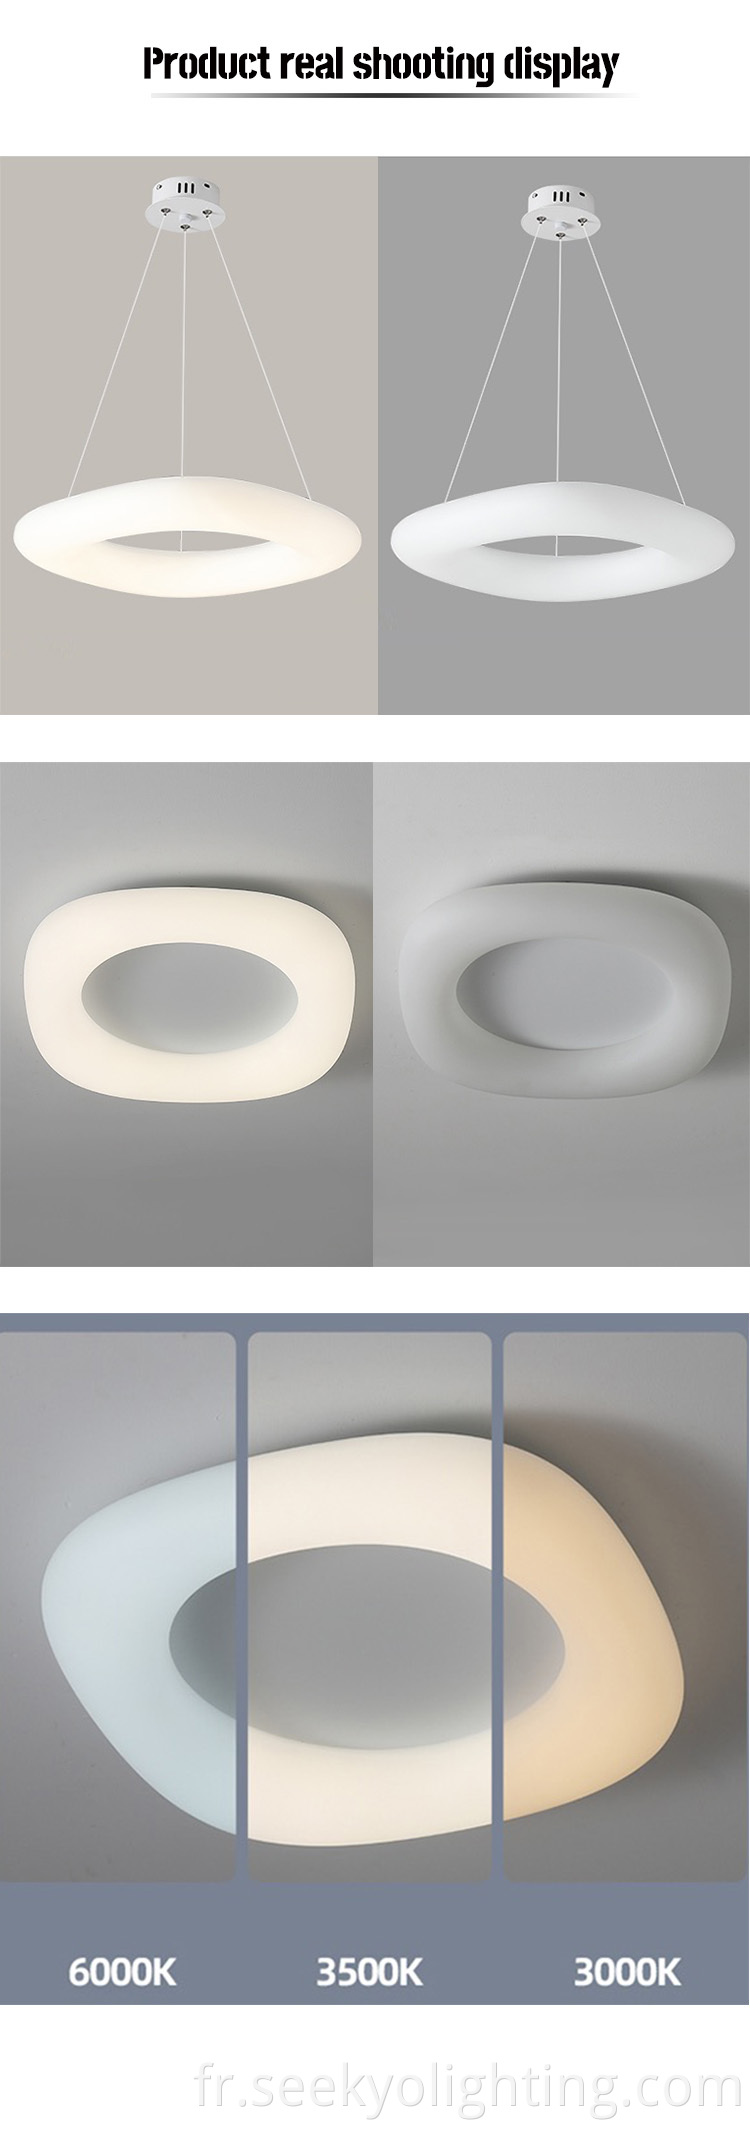 The lamp is crafted from high-quality acrylic material, ensuring its durability and longevity.